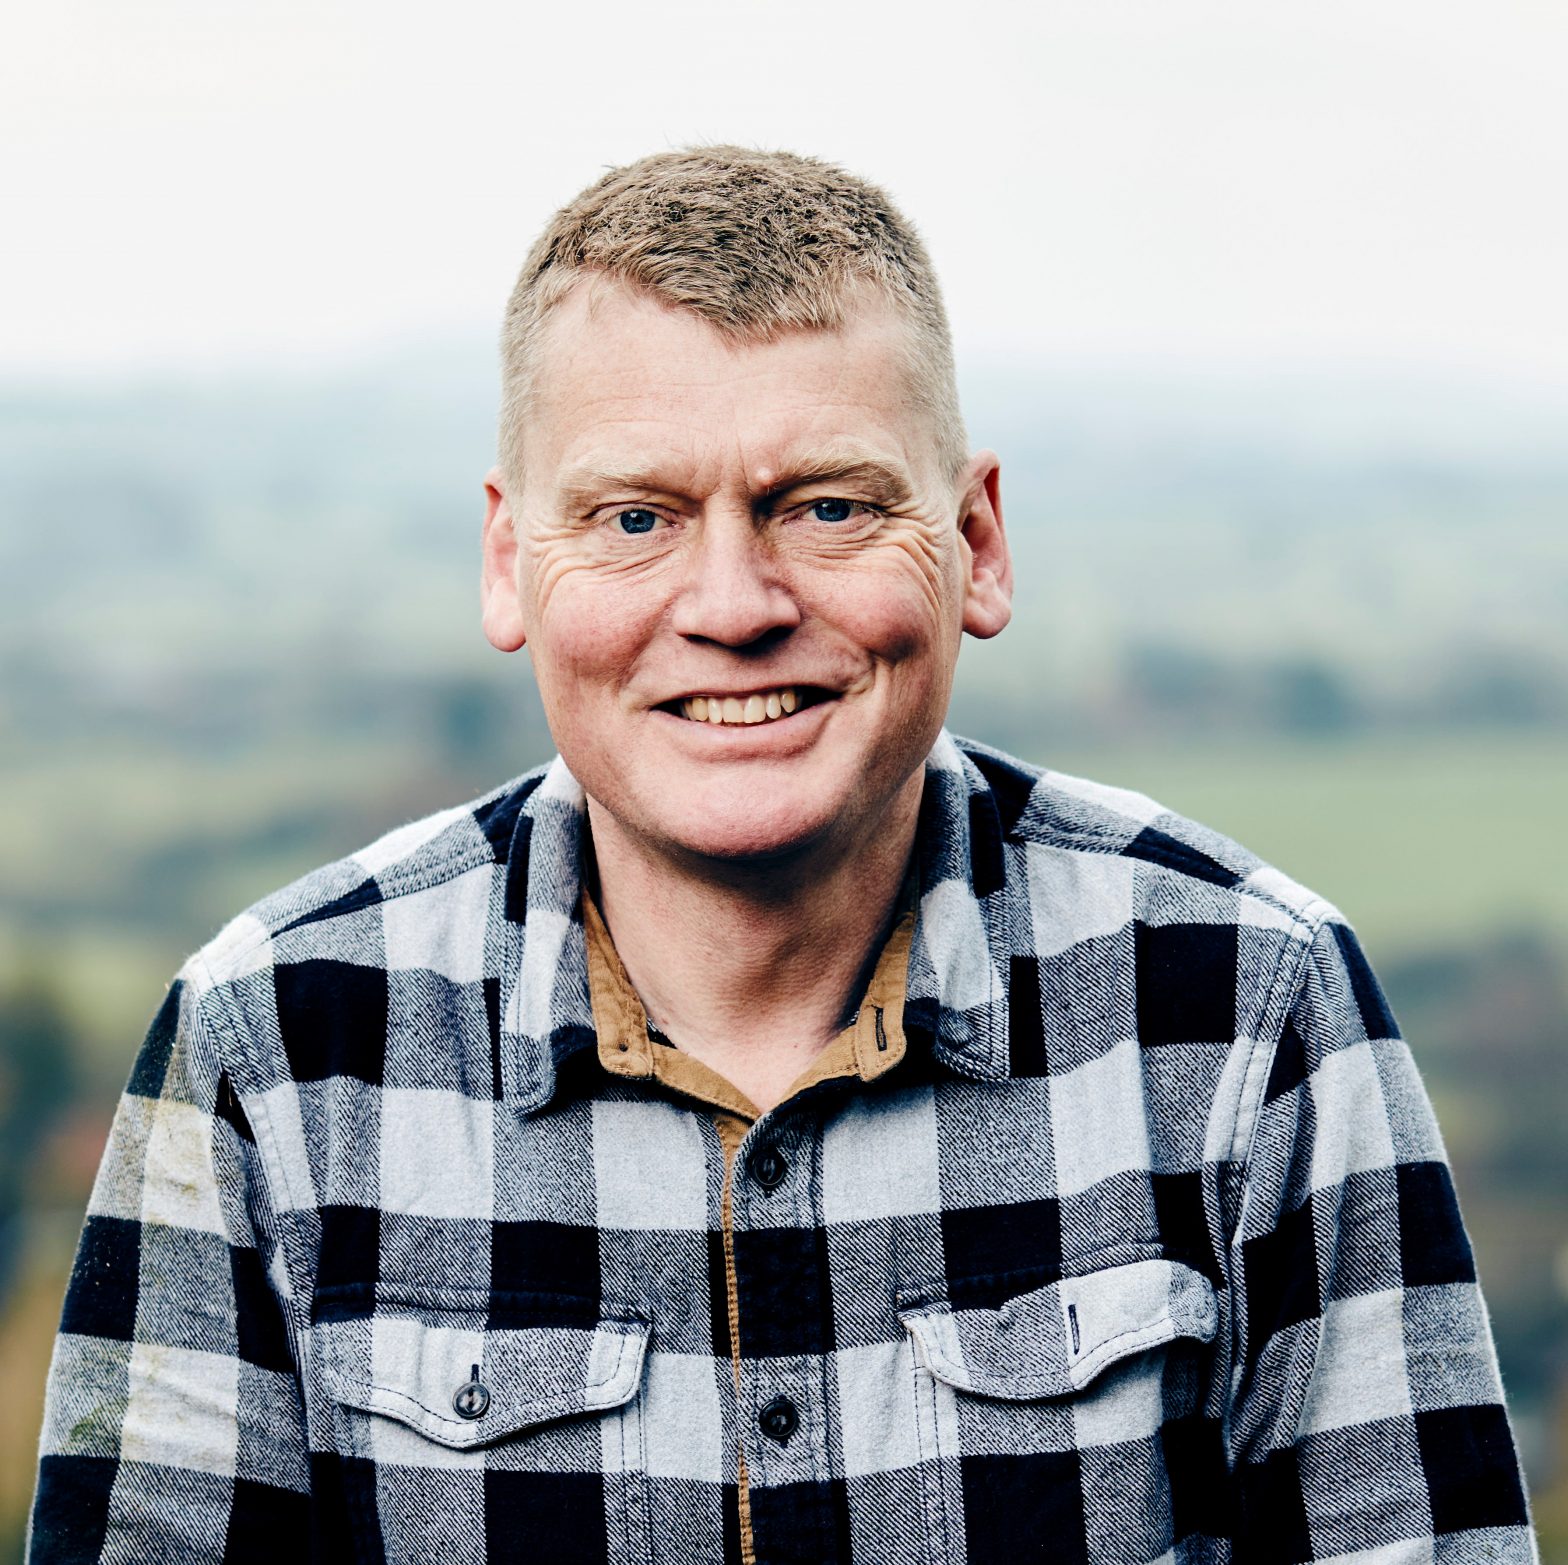 BROADCASTER TOM HEAP TO CHAIR KEY ENVIRONMENT DEBATE AT THE NATIONAL FRUIT SHOW